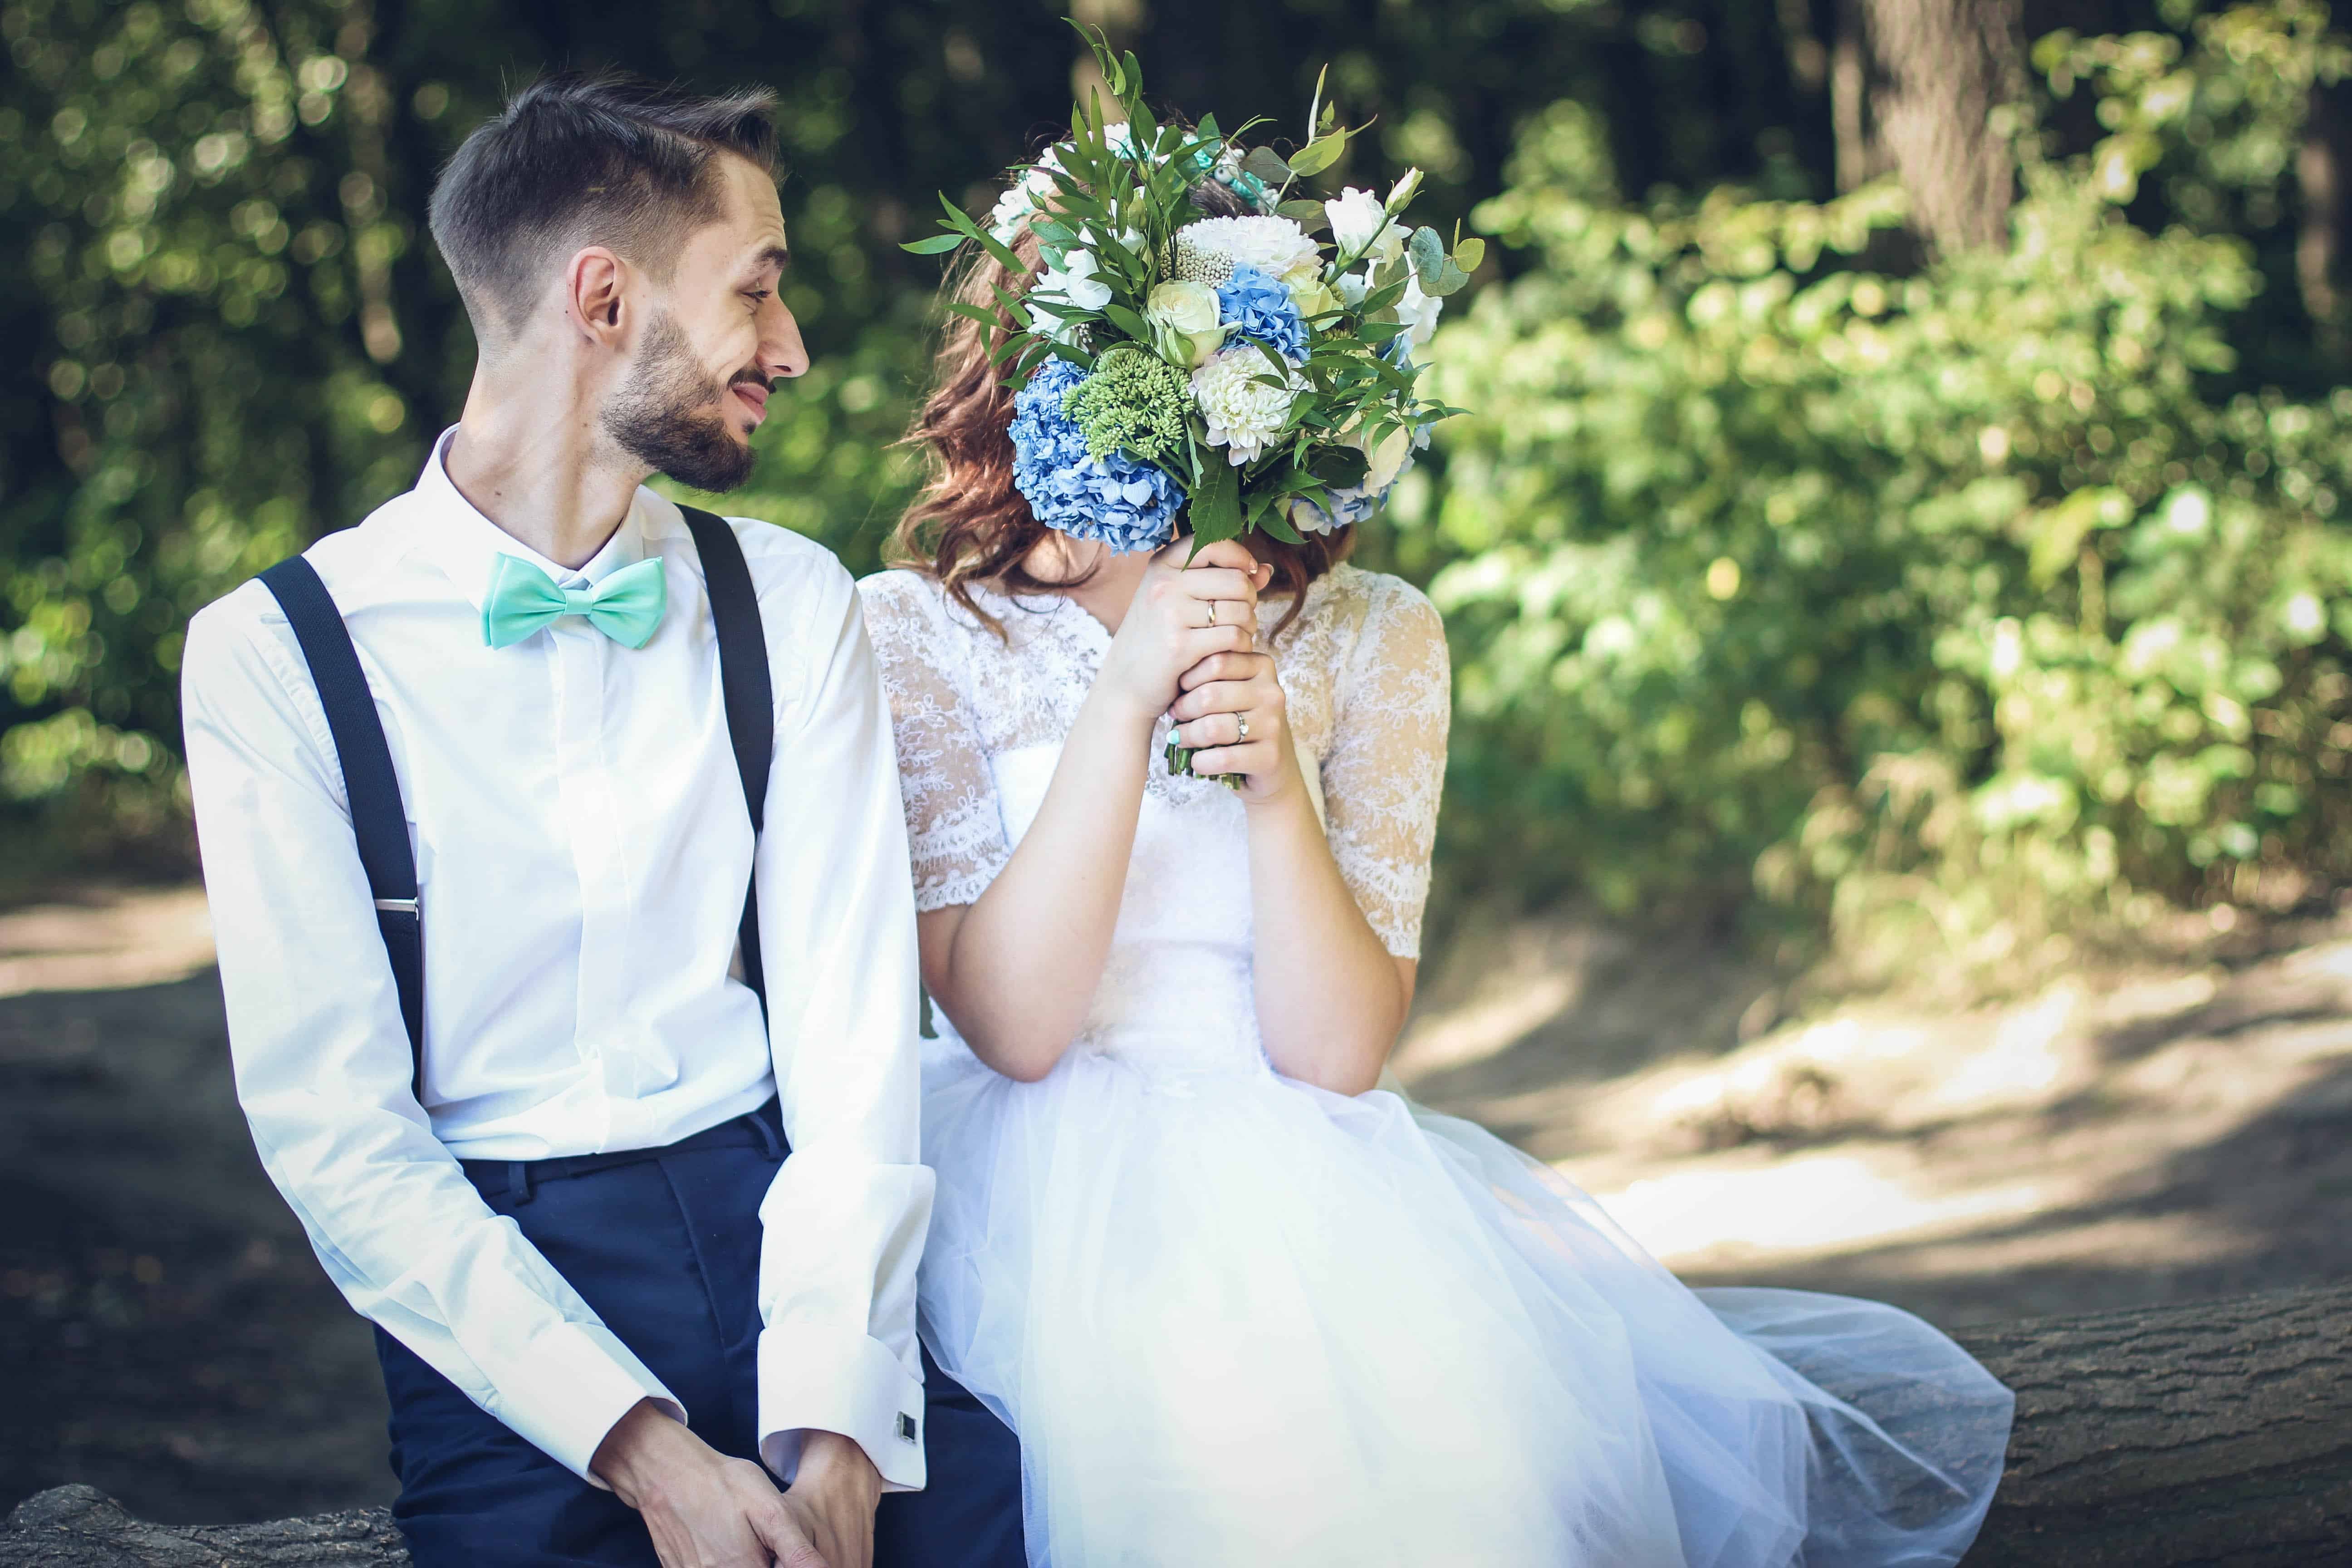 10 Common Wedding Vow Mistakes You'll Want to Avoid 25